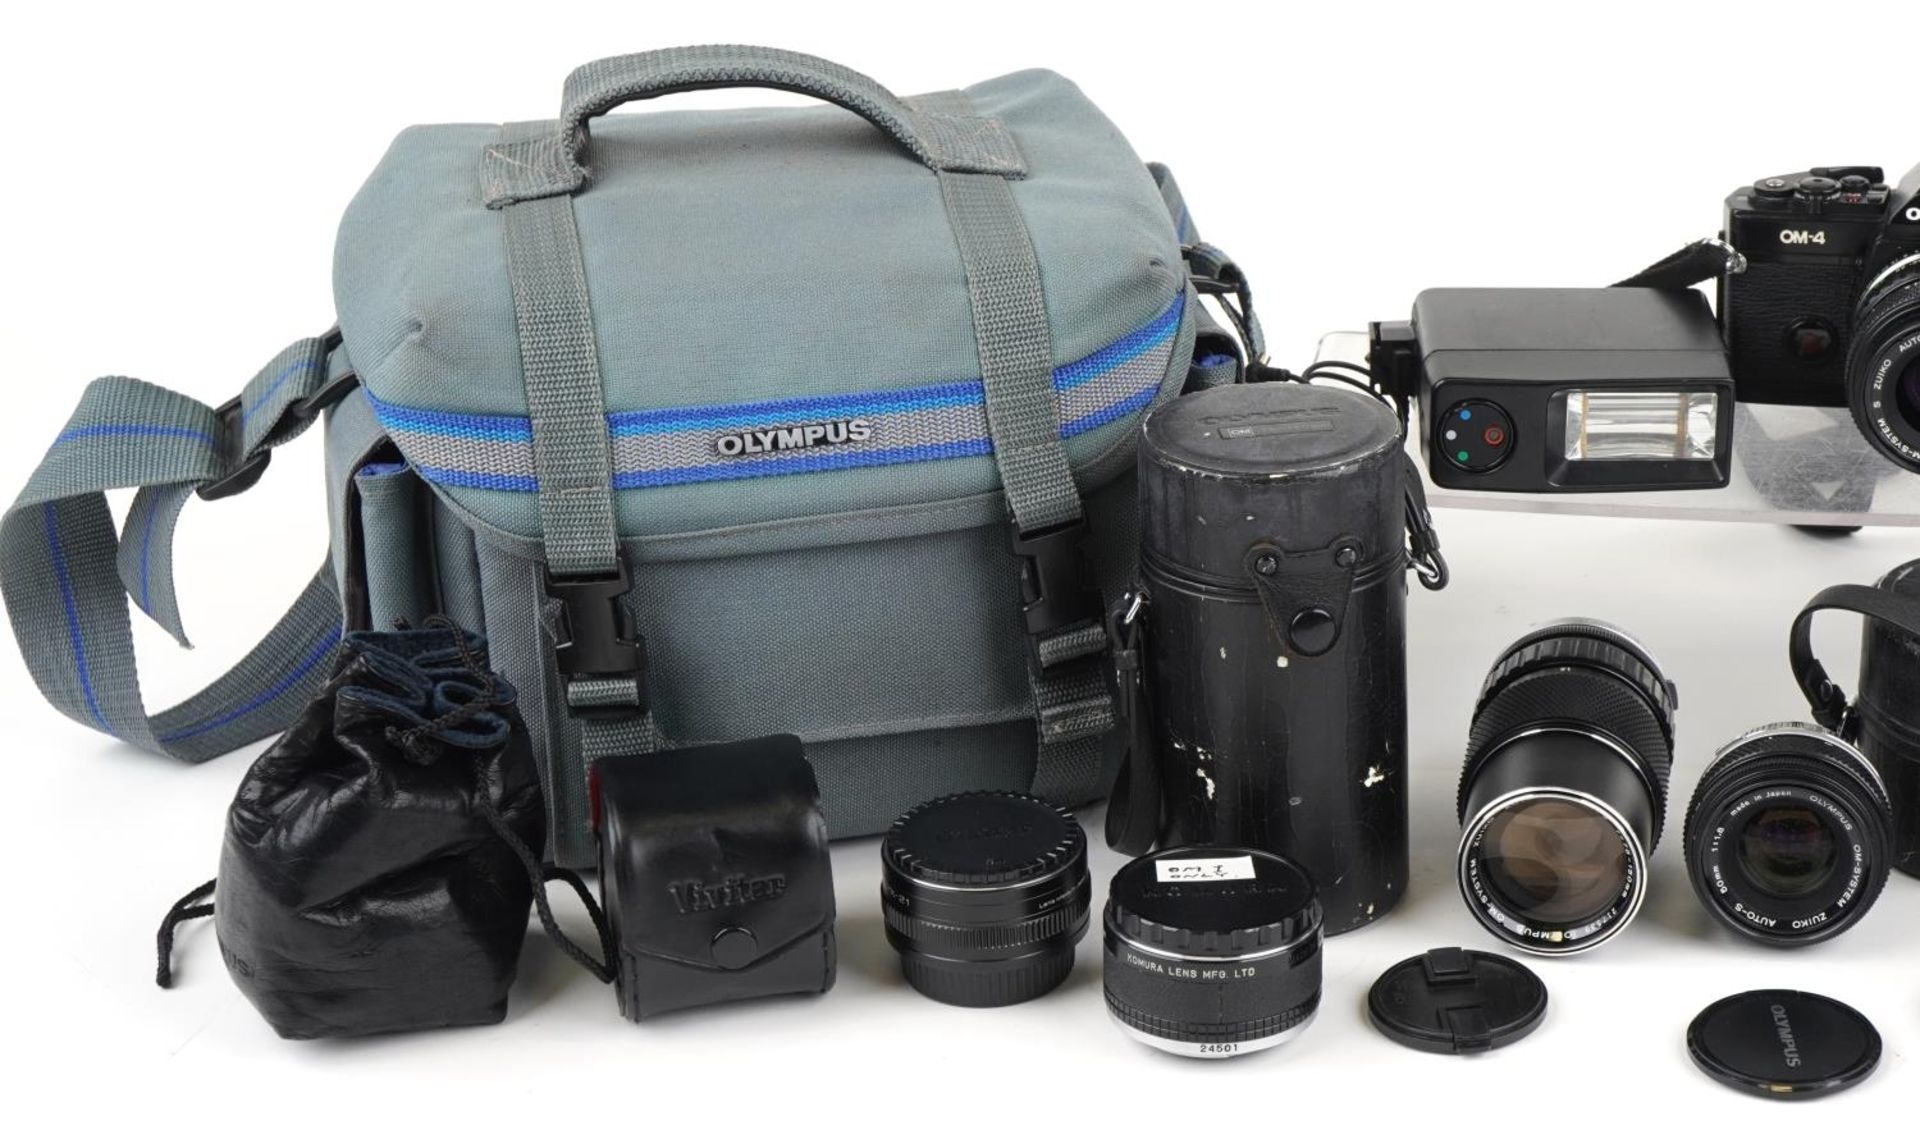 Canon OM-4 camera with various lenses and accessories, some with boxes : For further information - Image 2 of 3